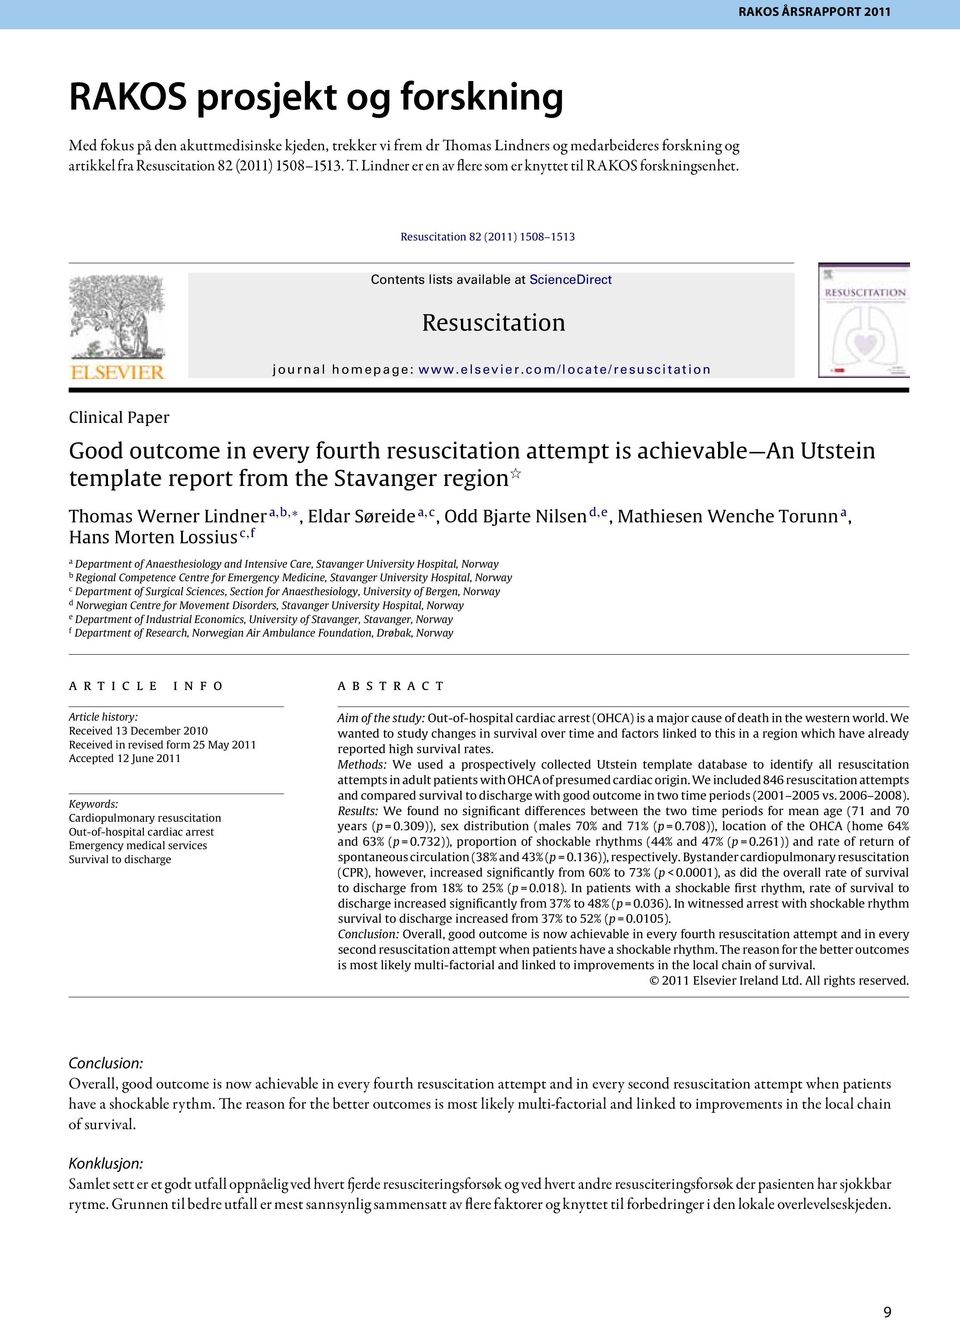 com/locate/resuscitation Clinical Paper Good outcome in every fourth resuscitation attempt is achievable An Utstein template report from the Stavanger region Thomas Werner Lindner a,b,, Eldar Søreide